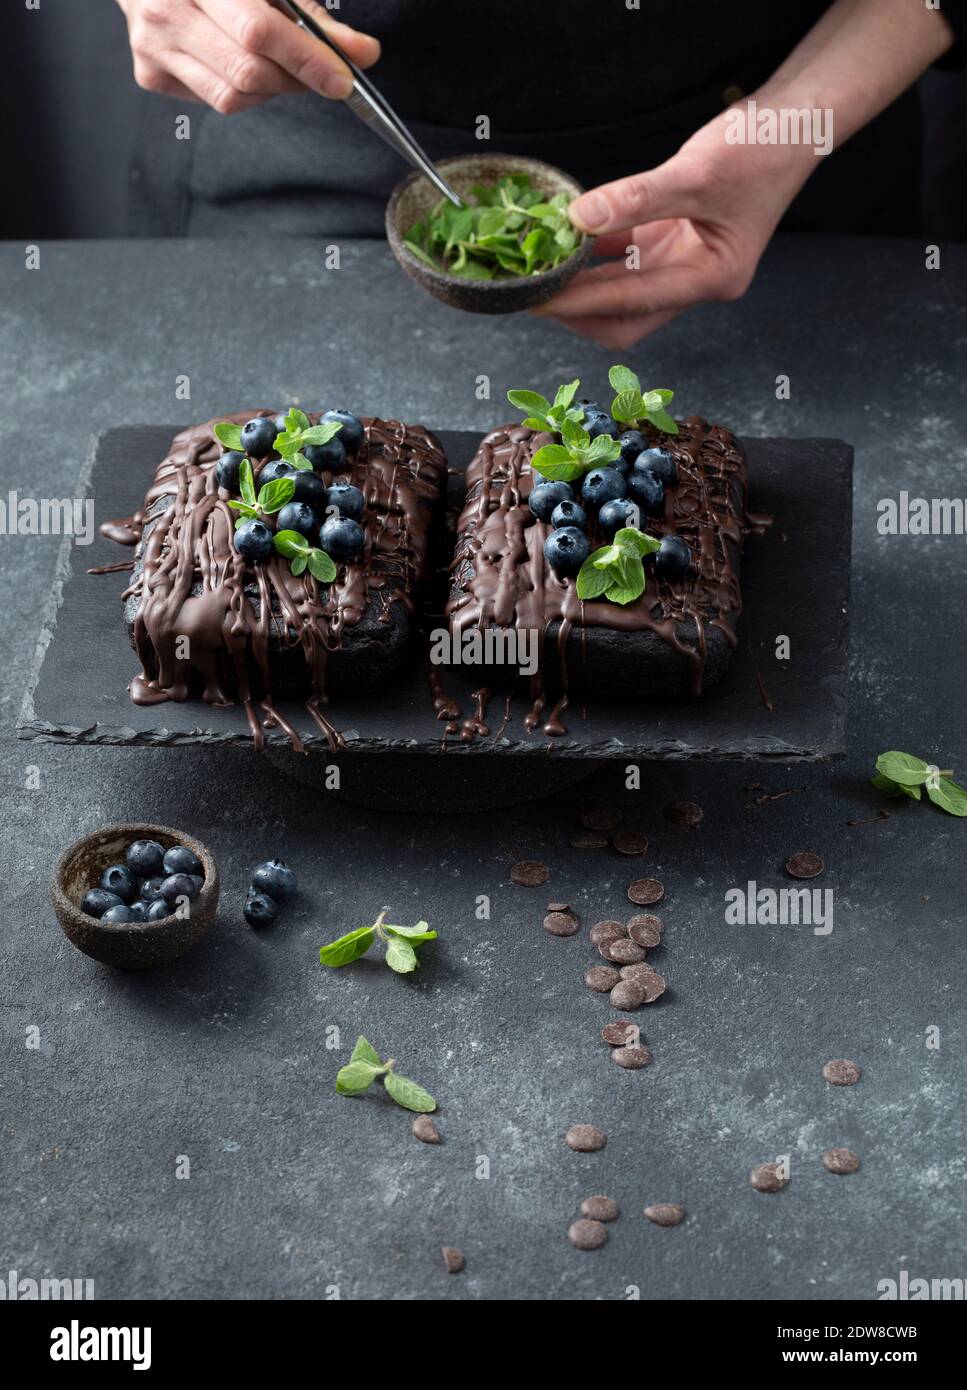 Pastry chef decorates brownie cake with blueberries and mint leaves. Stock Photo